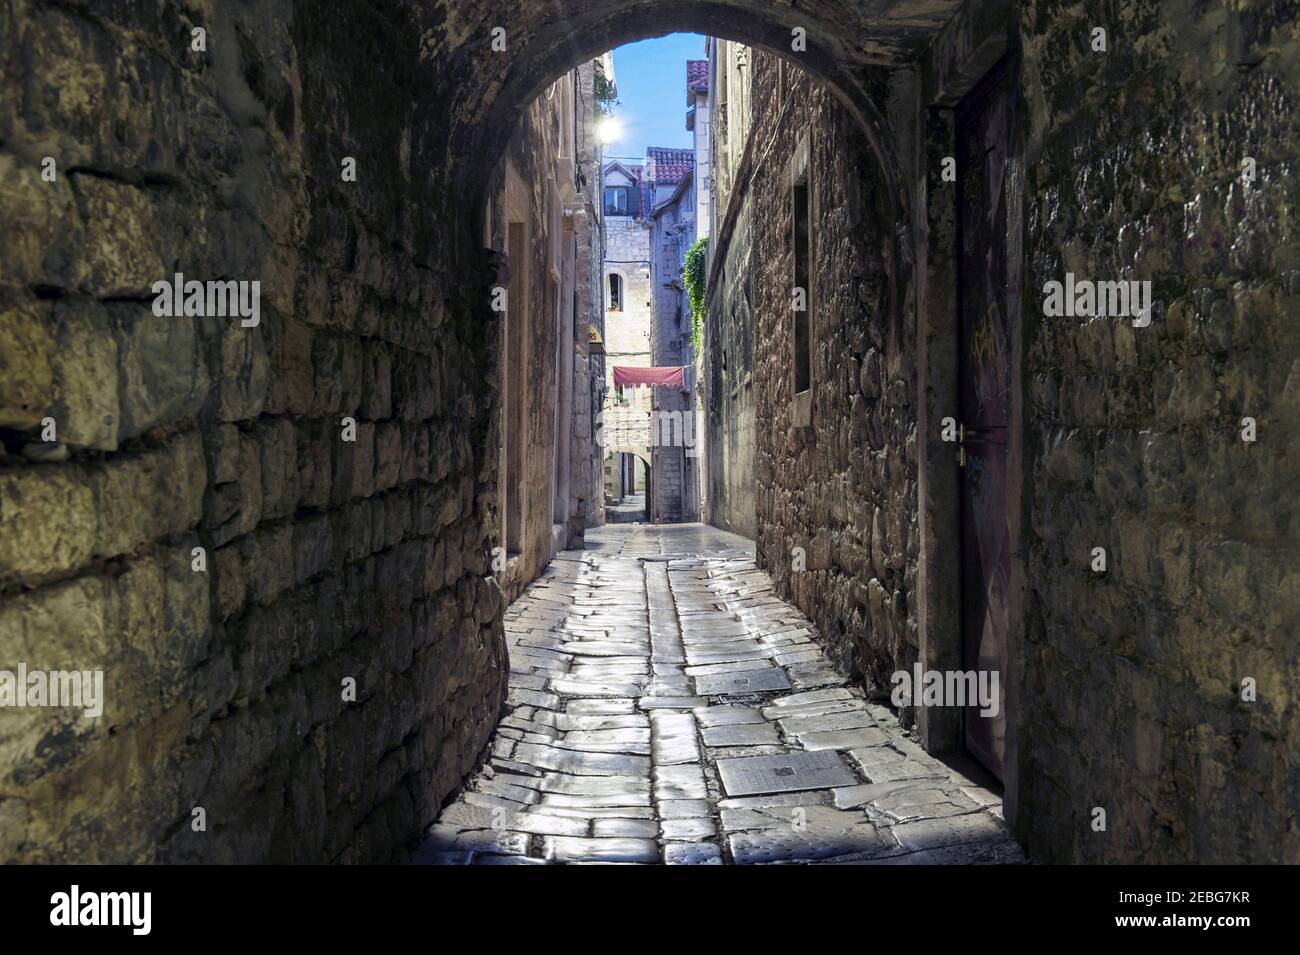 Split - Croatian - Dalmatia - August 25, 2018: Split, Croatia - Street with traditional stone houses, built in the 17th century, as a filming location Stock Photo